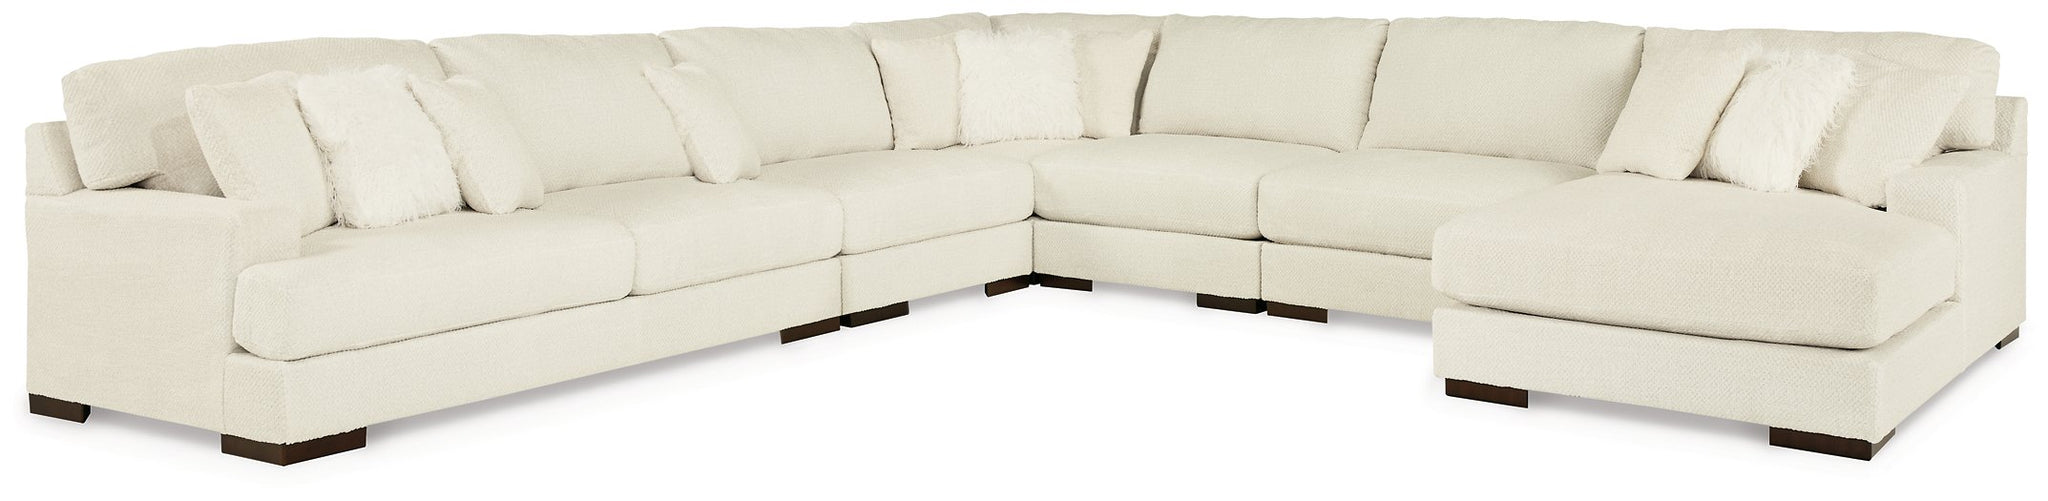 Zada 6-Piece Sectional with Chaise image